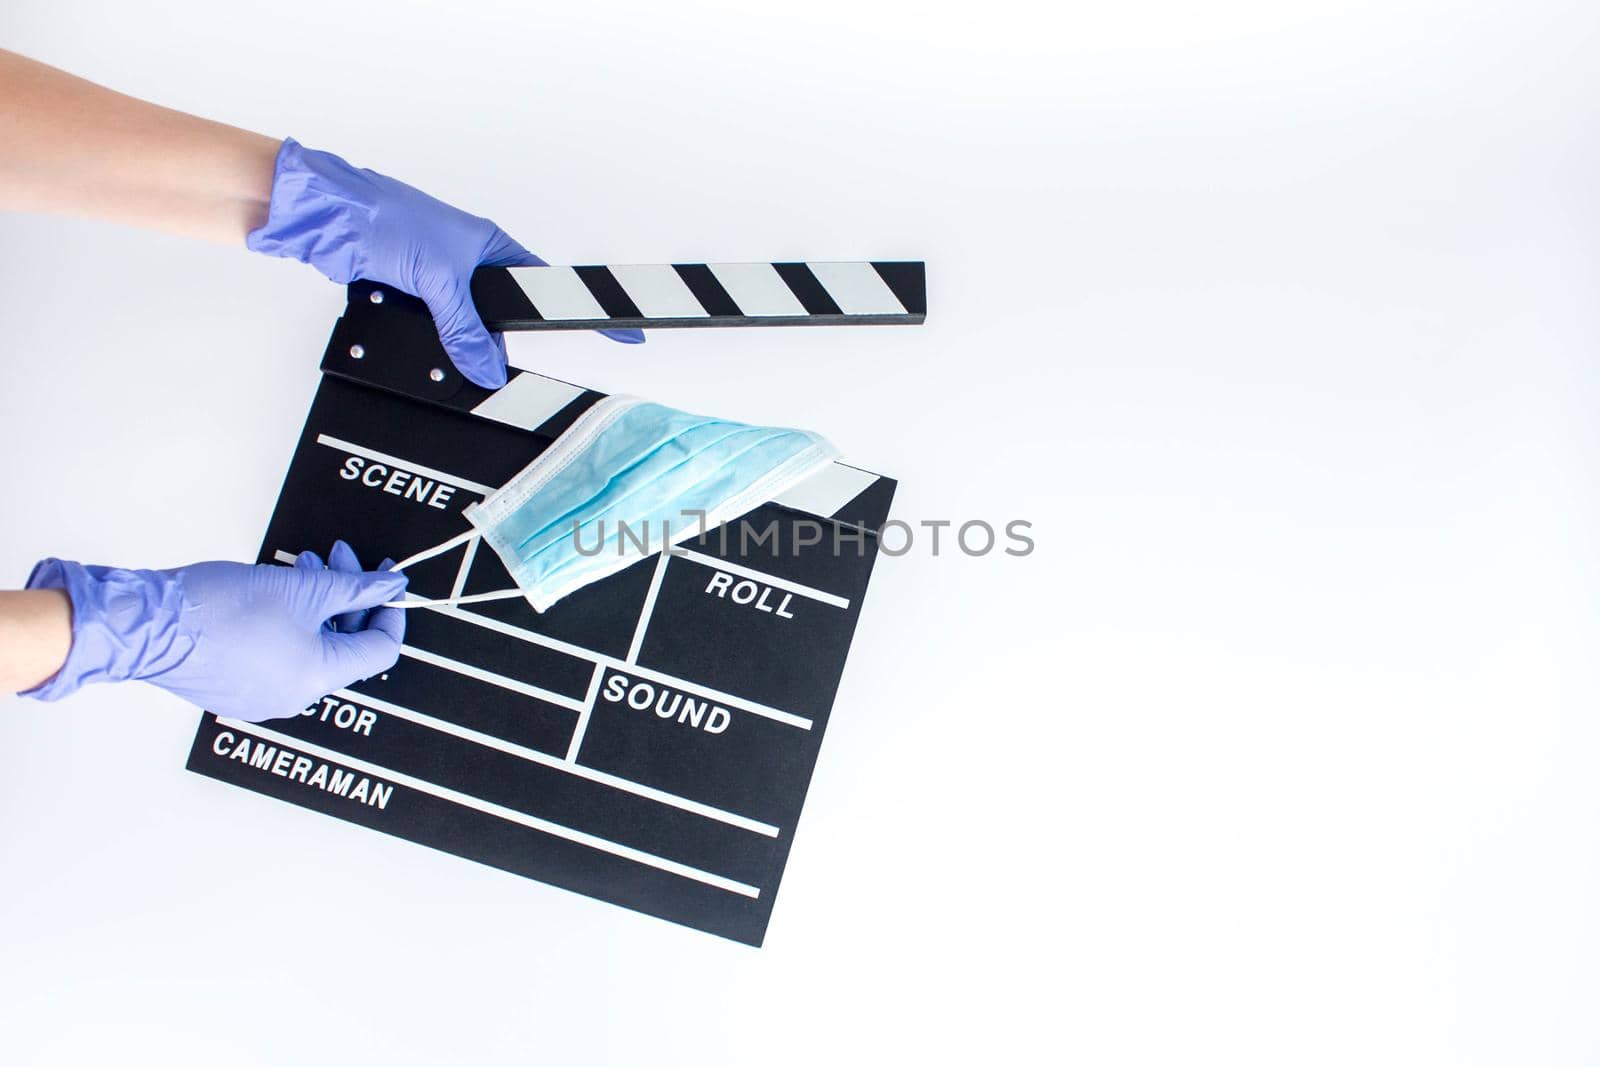 Hands in blue disposable rubber gloves holding openned movie clapper. Wants to remove medical mask. Influence of pandemic on cinematography by JuliaDorian